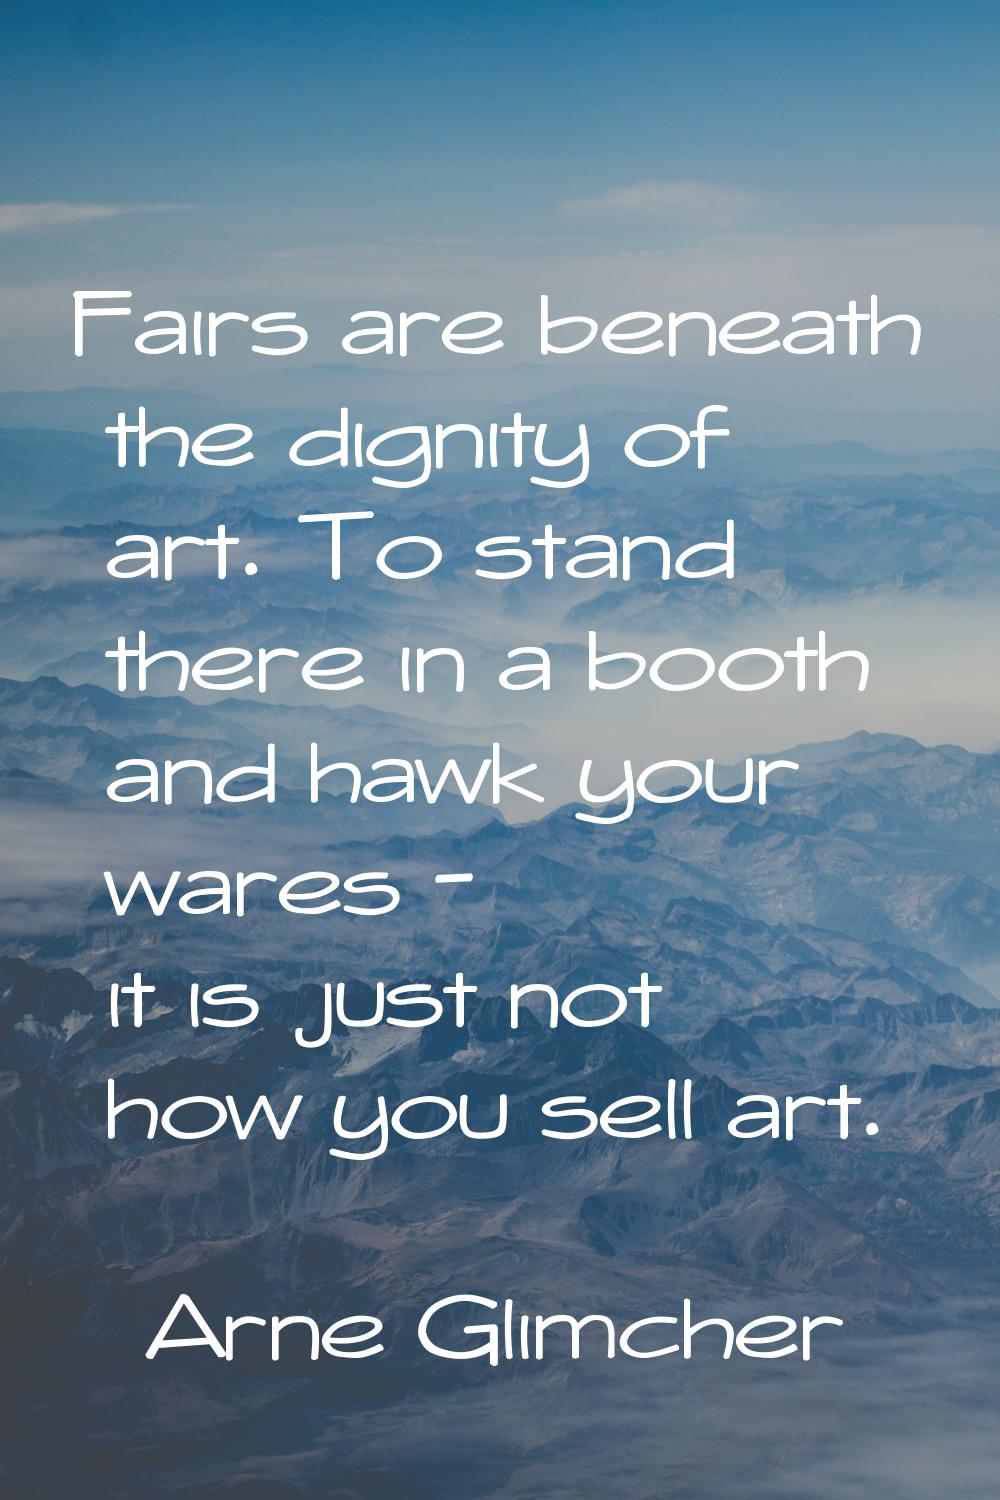 Fairs are beneath the dignity of art. To stand there in a booth and hawk your wares - it is just no